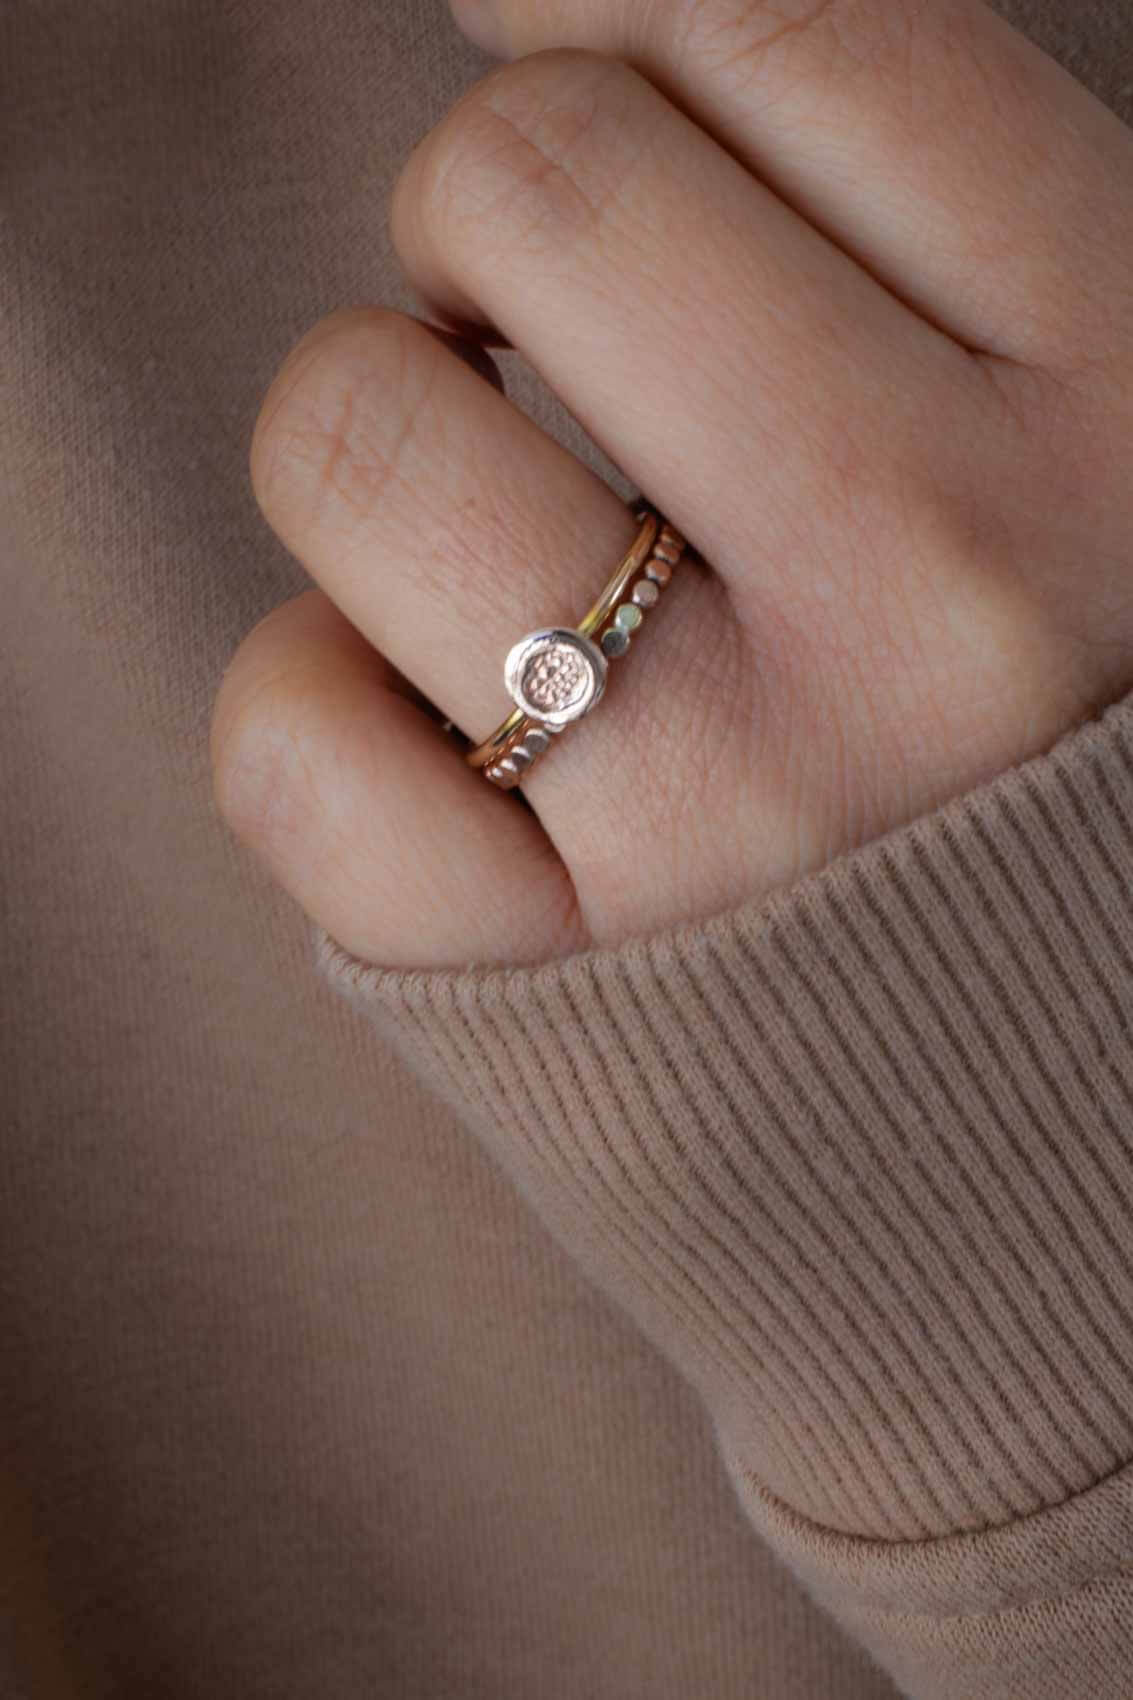 Dainty Hammered Beaded Ring